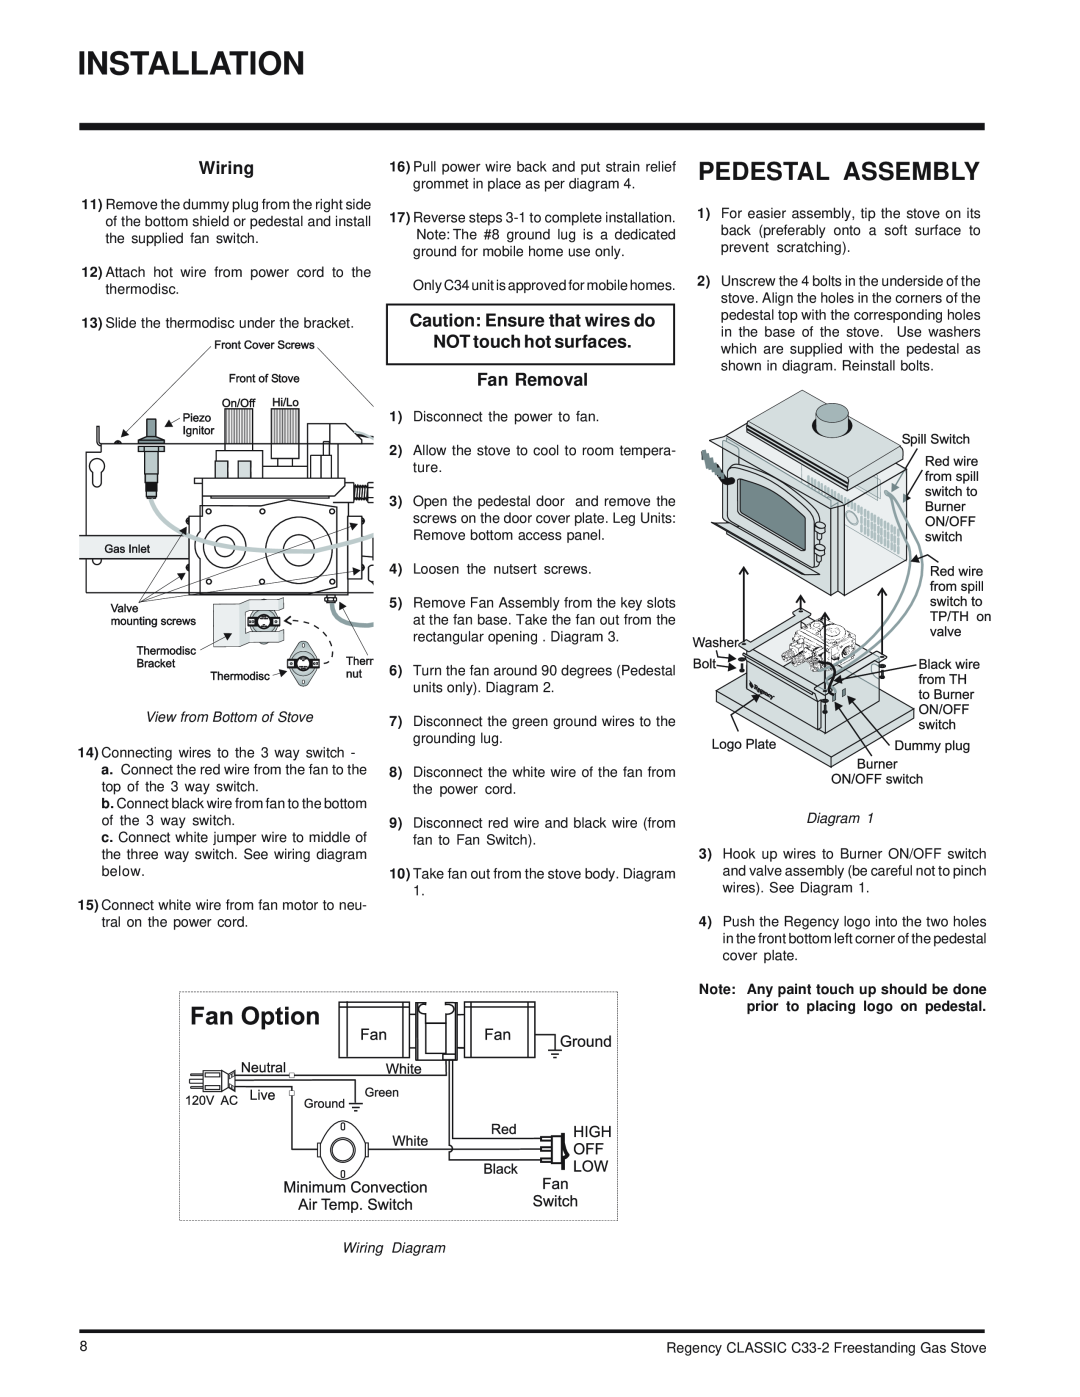 Regency C33-LP2 Pedestal Assembly, Wiring, Caution Ensure that wires do, NOT touch hot surfaces Fan Removal, Diagram 